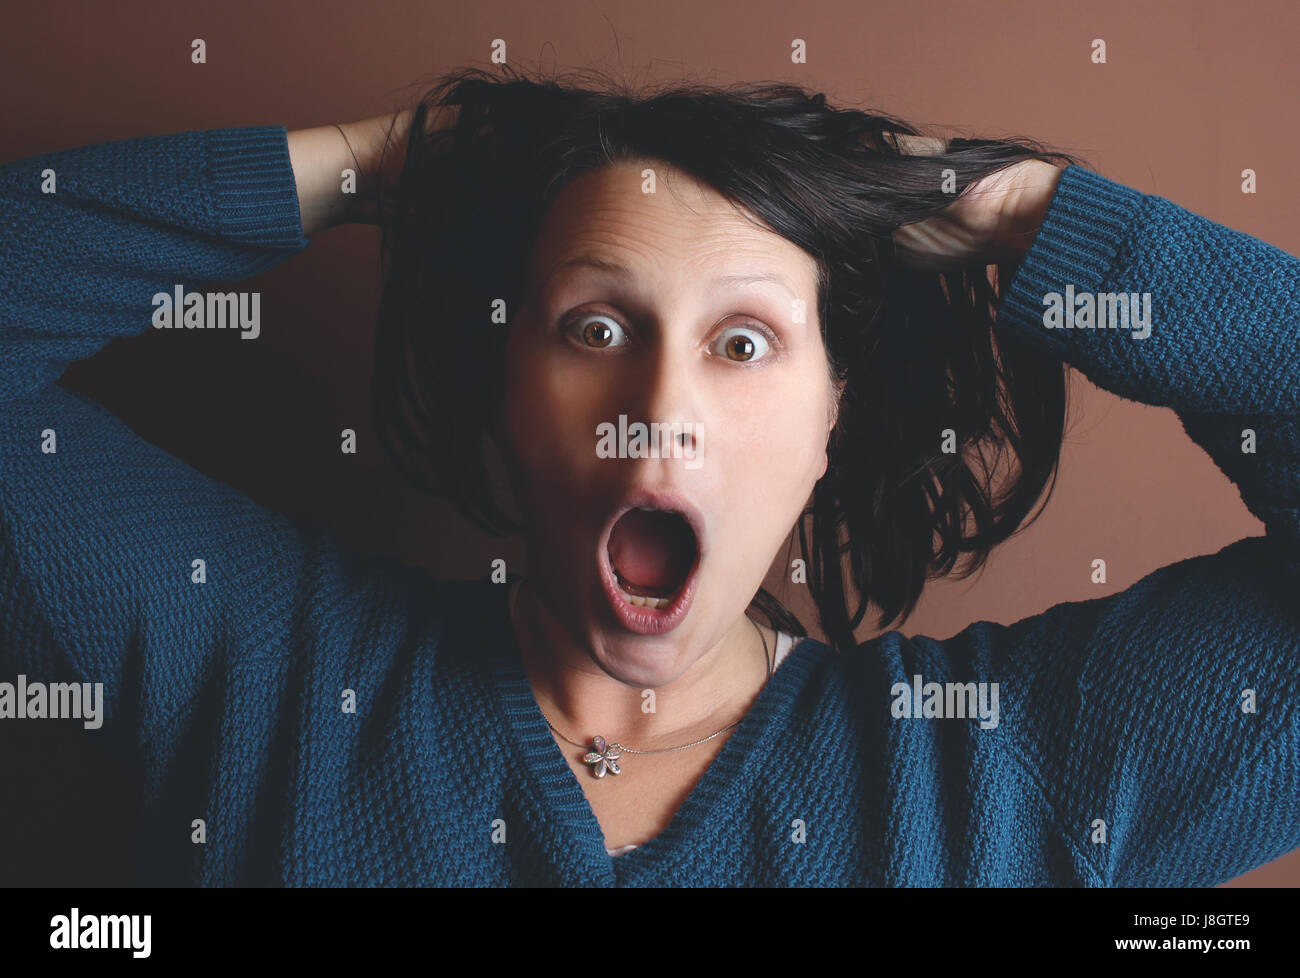 Stunned facial expression Stock Photo